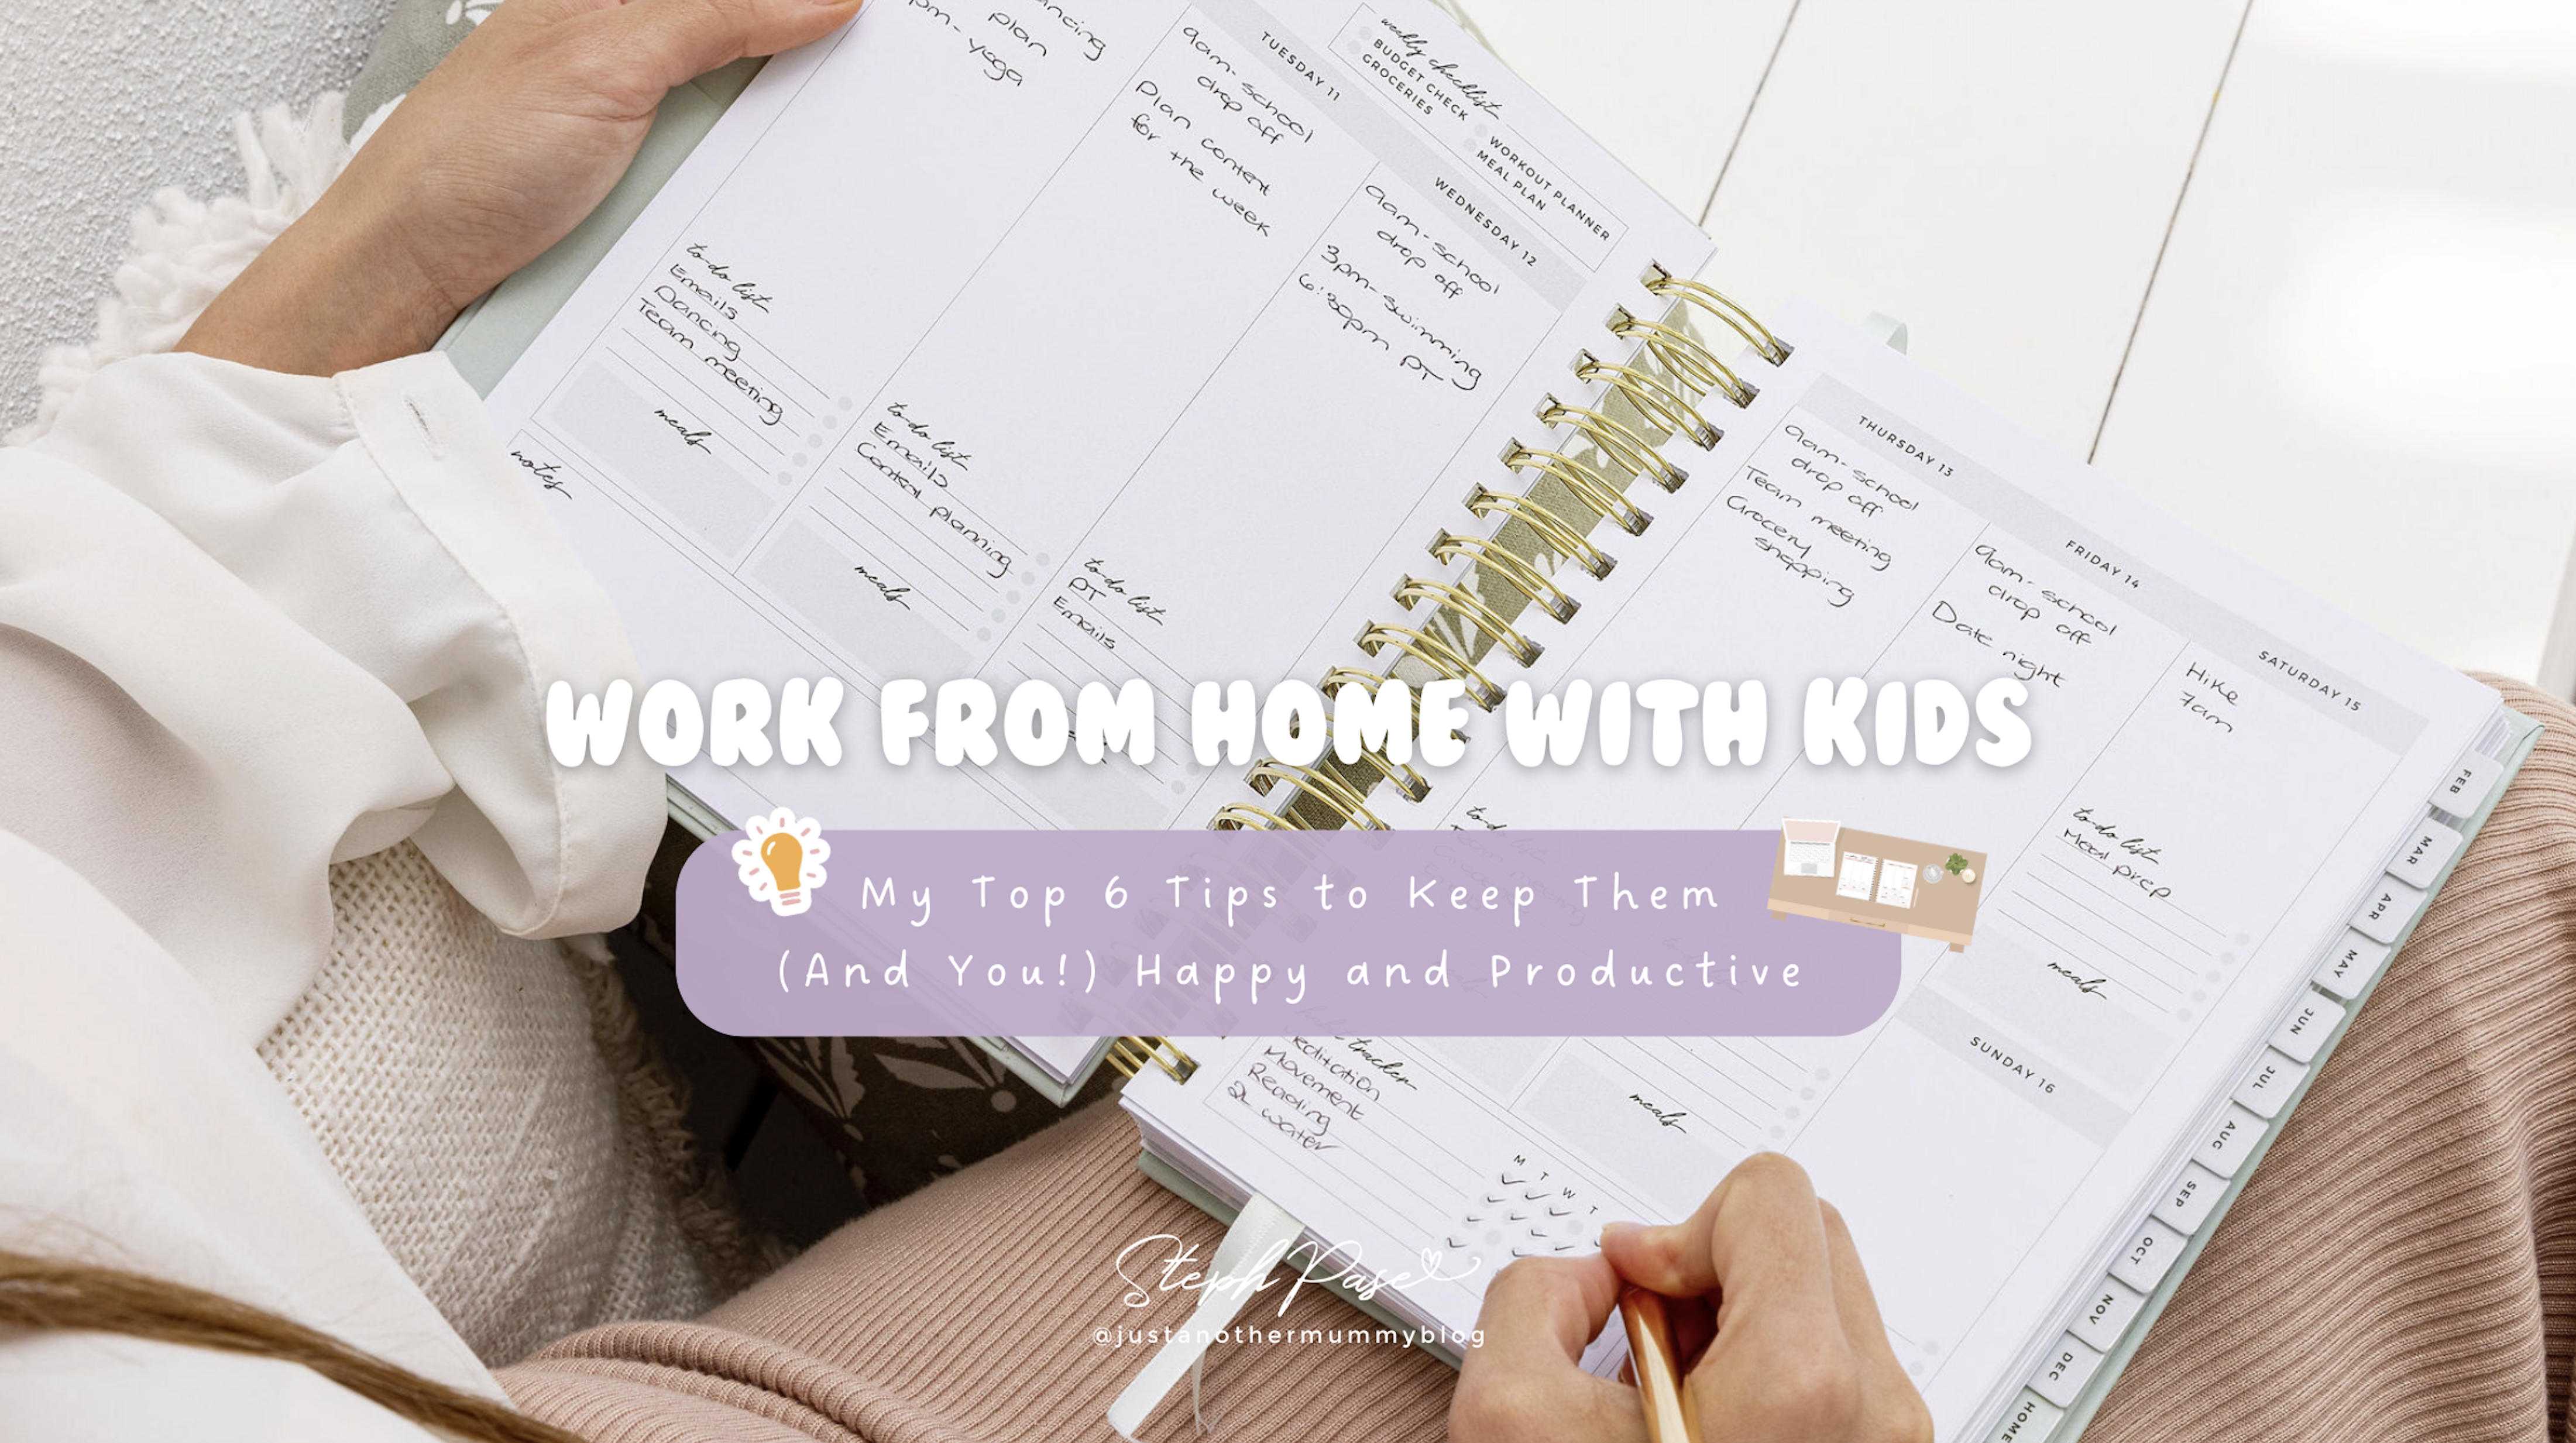 WORK FROM HOME WITH KIDS